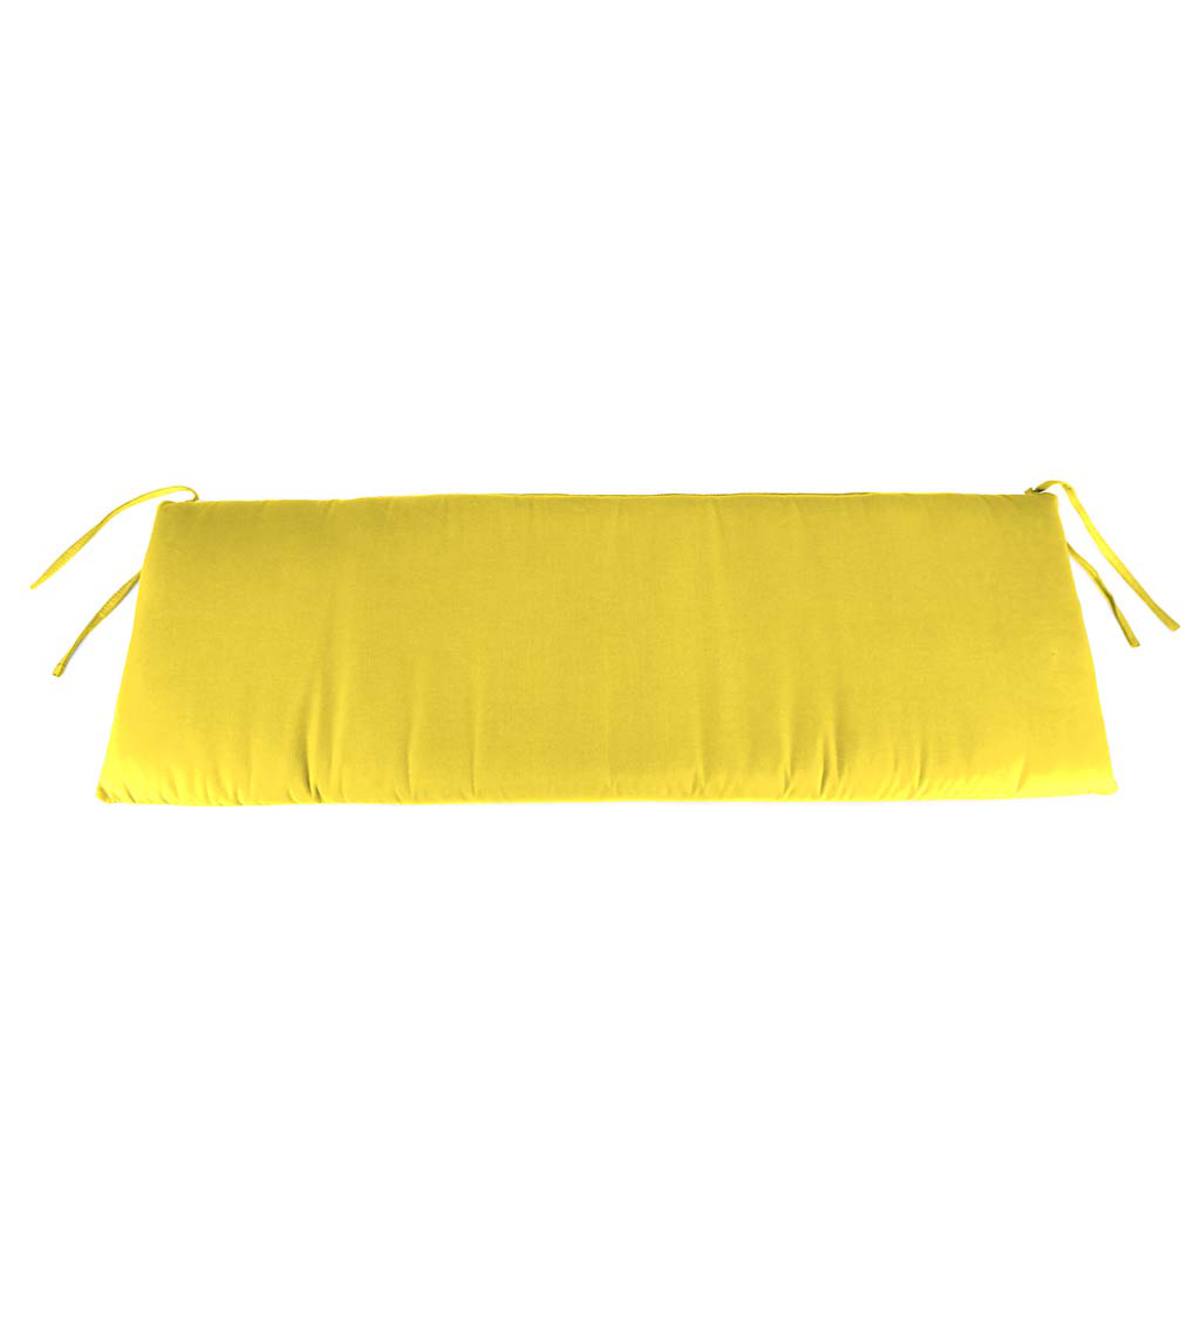 Sale! Polyester Classic Swing/Bench Cushion, 54"x 18½"x 3"